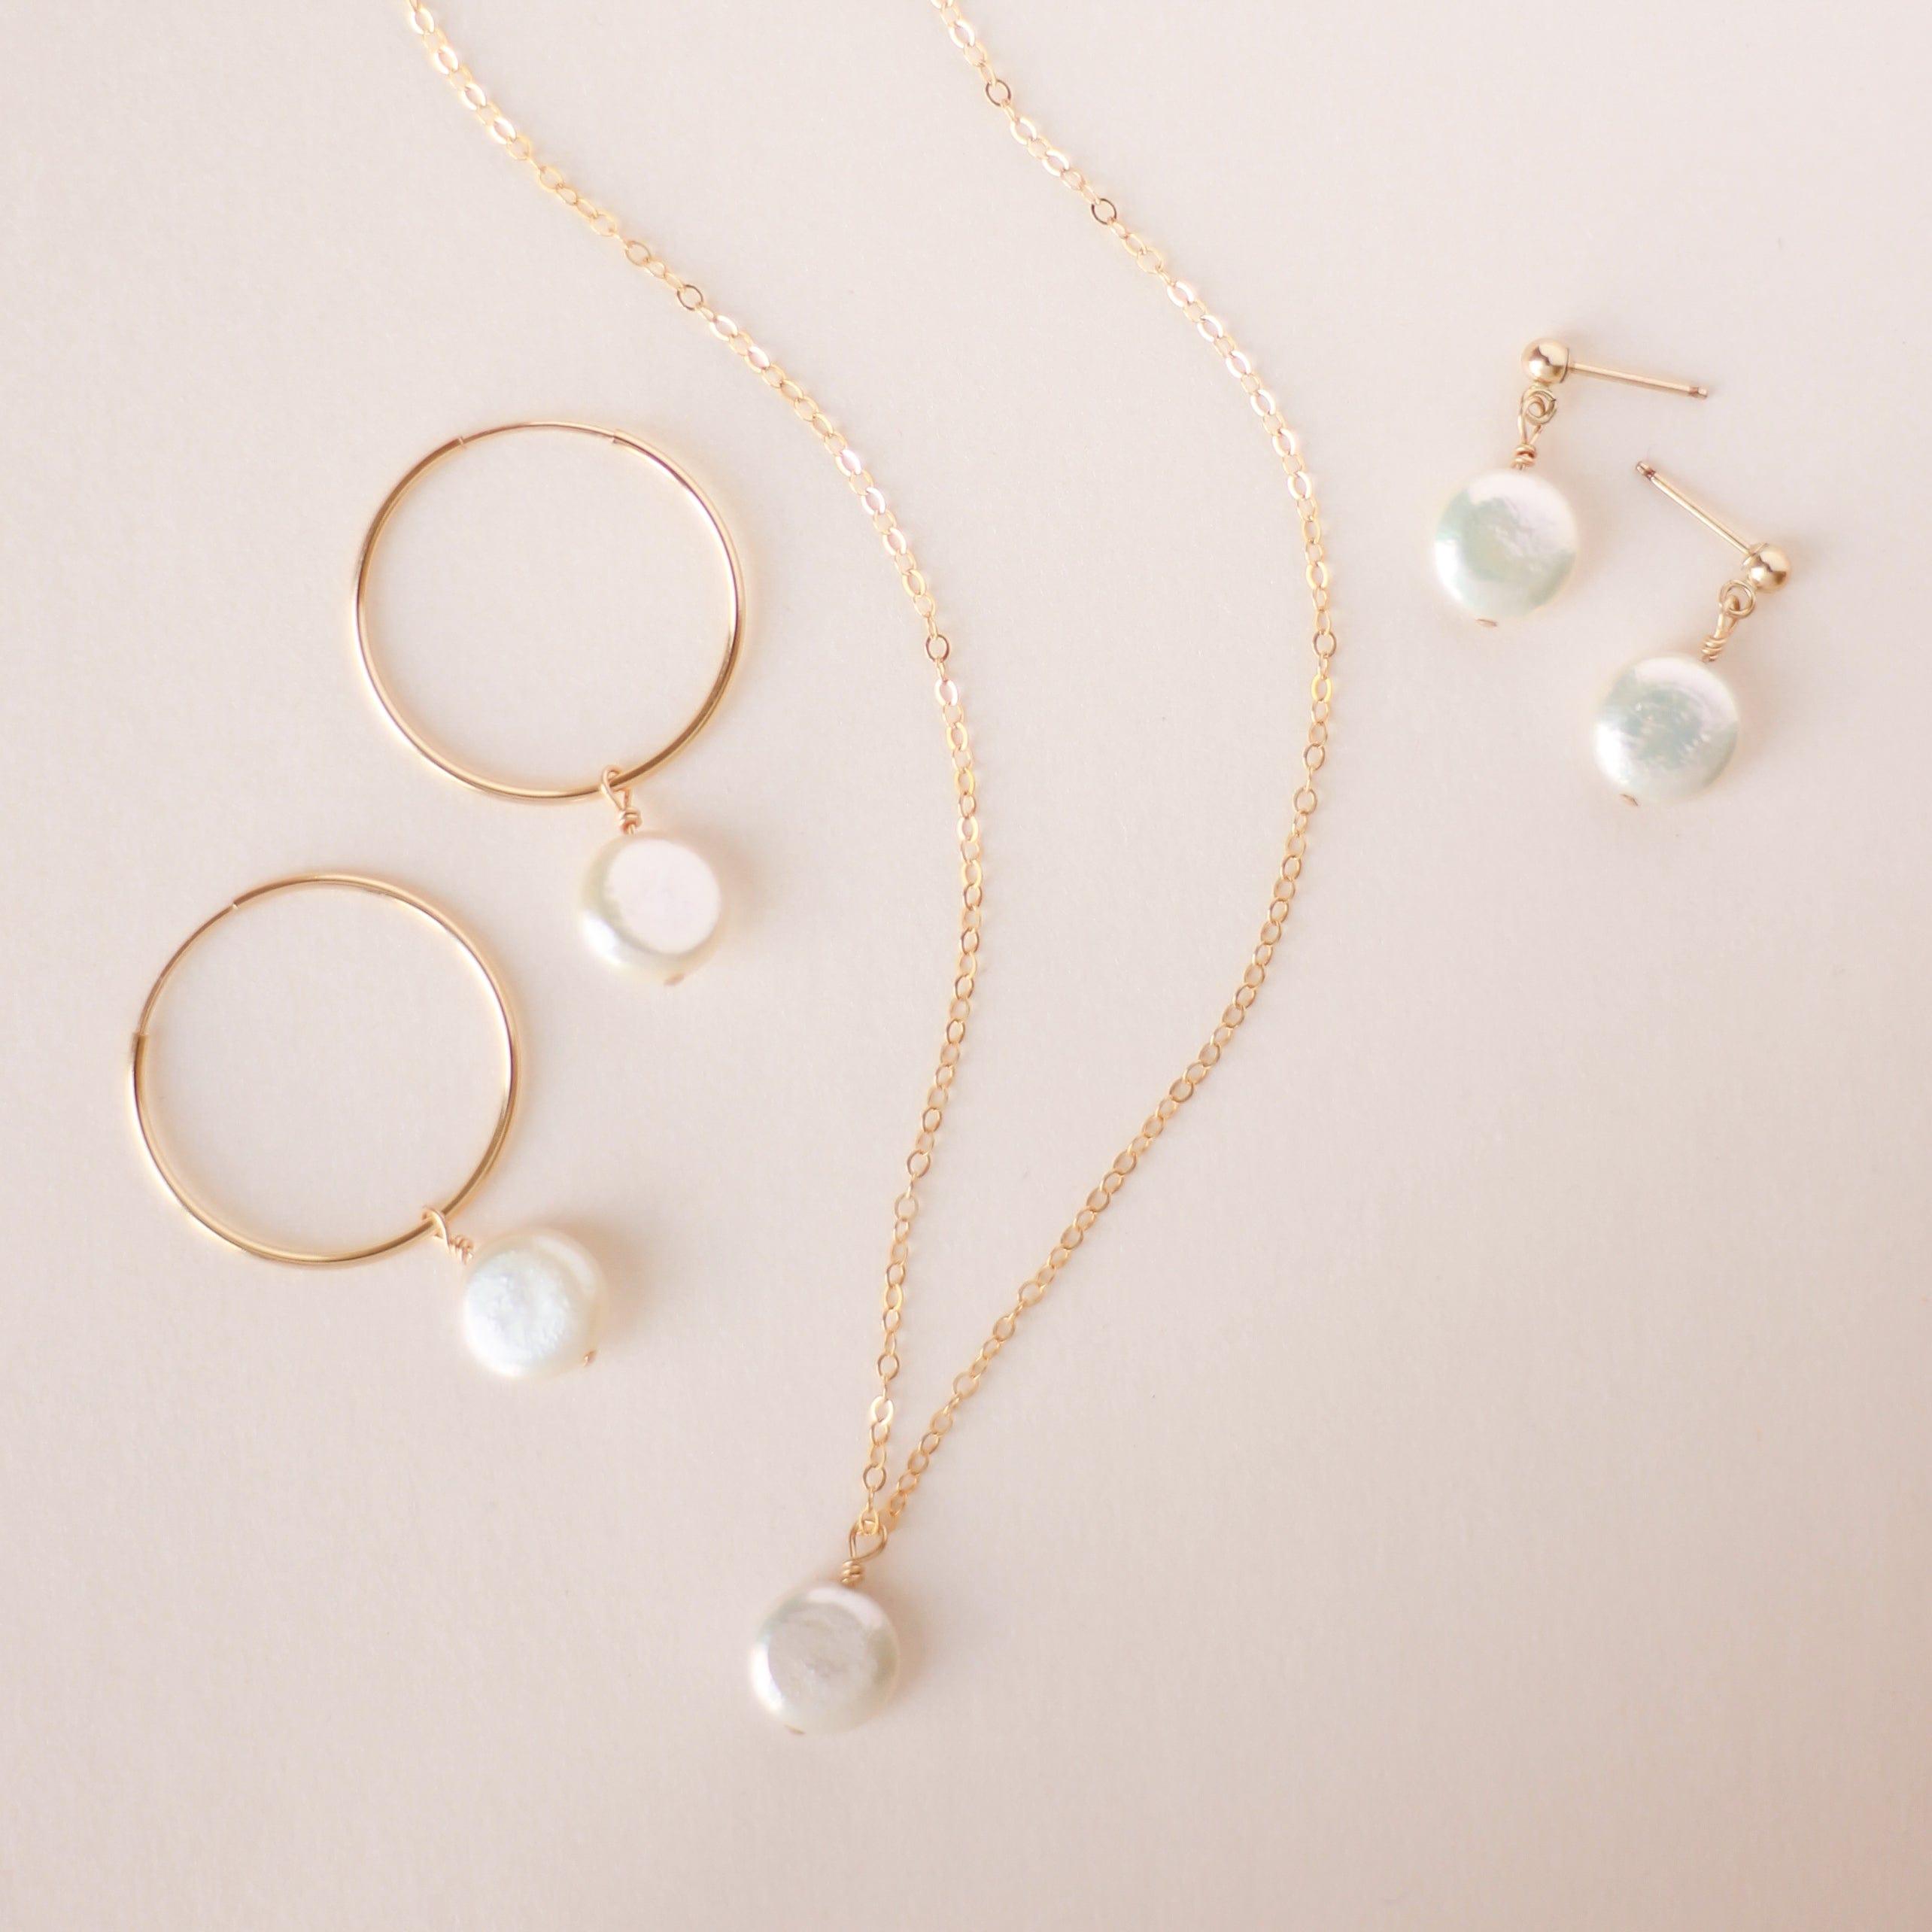 Lana Pearl Necklace - Nolia Jewelry - Meaningful + Sustainably Handcrafted Jewelry